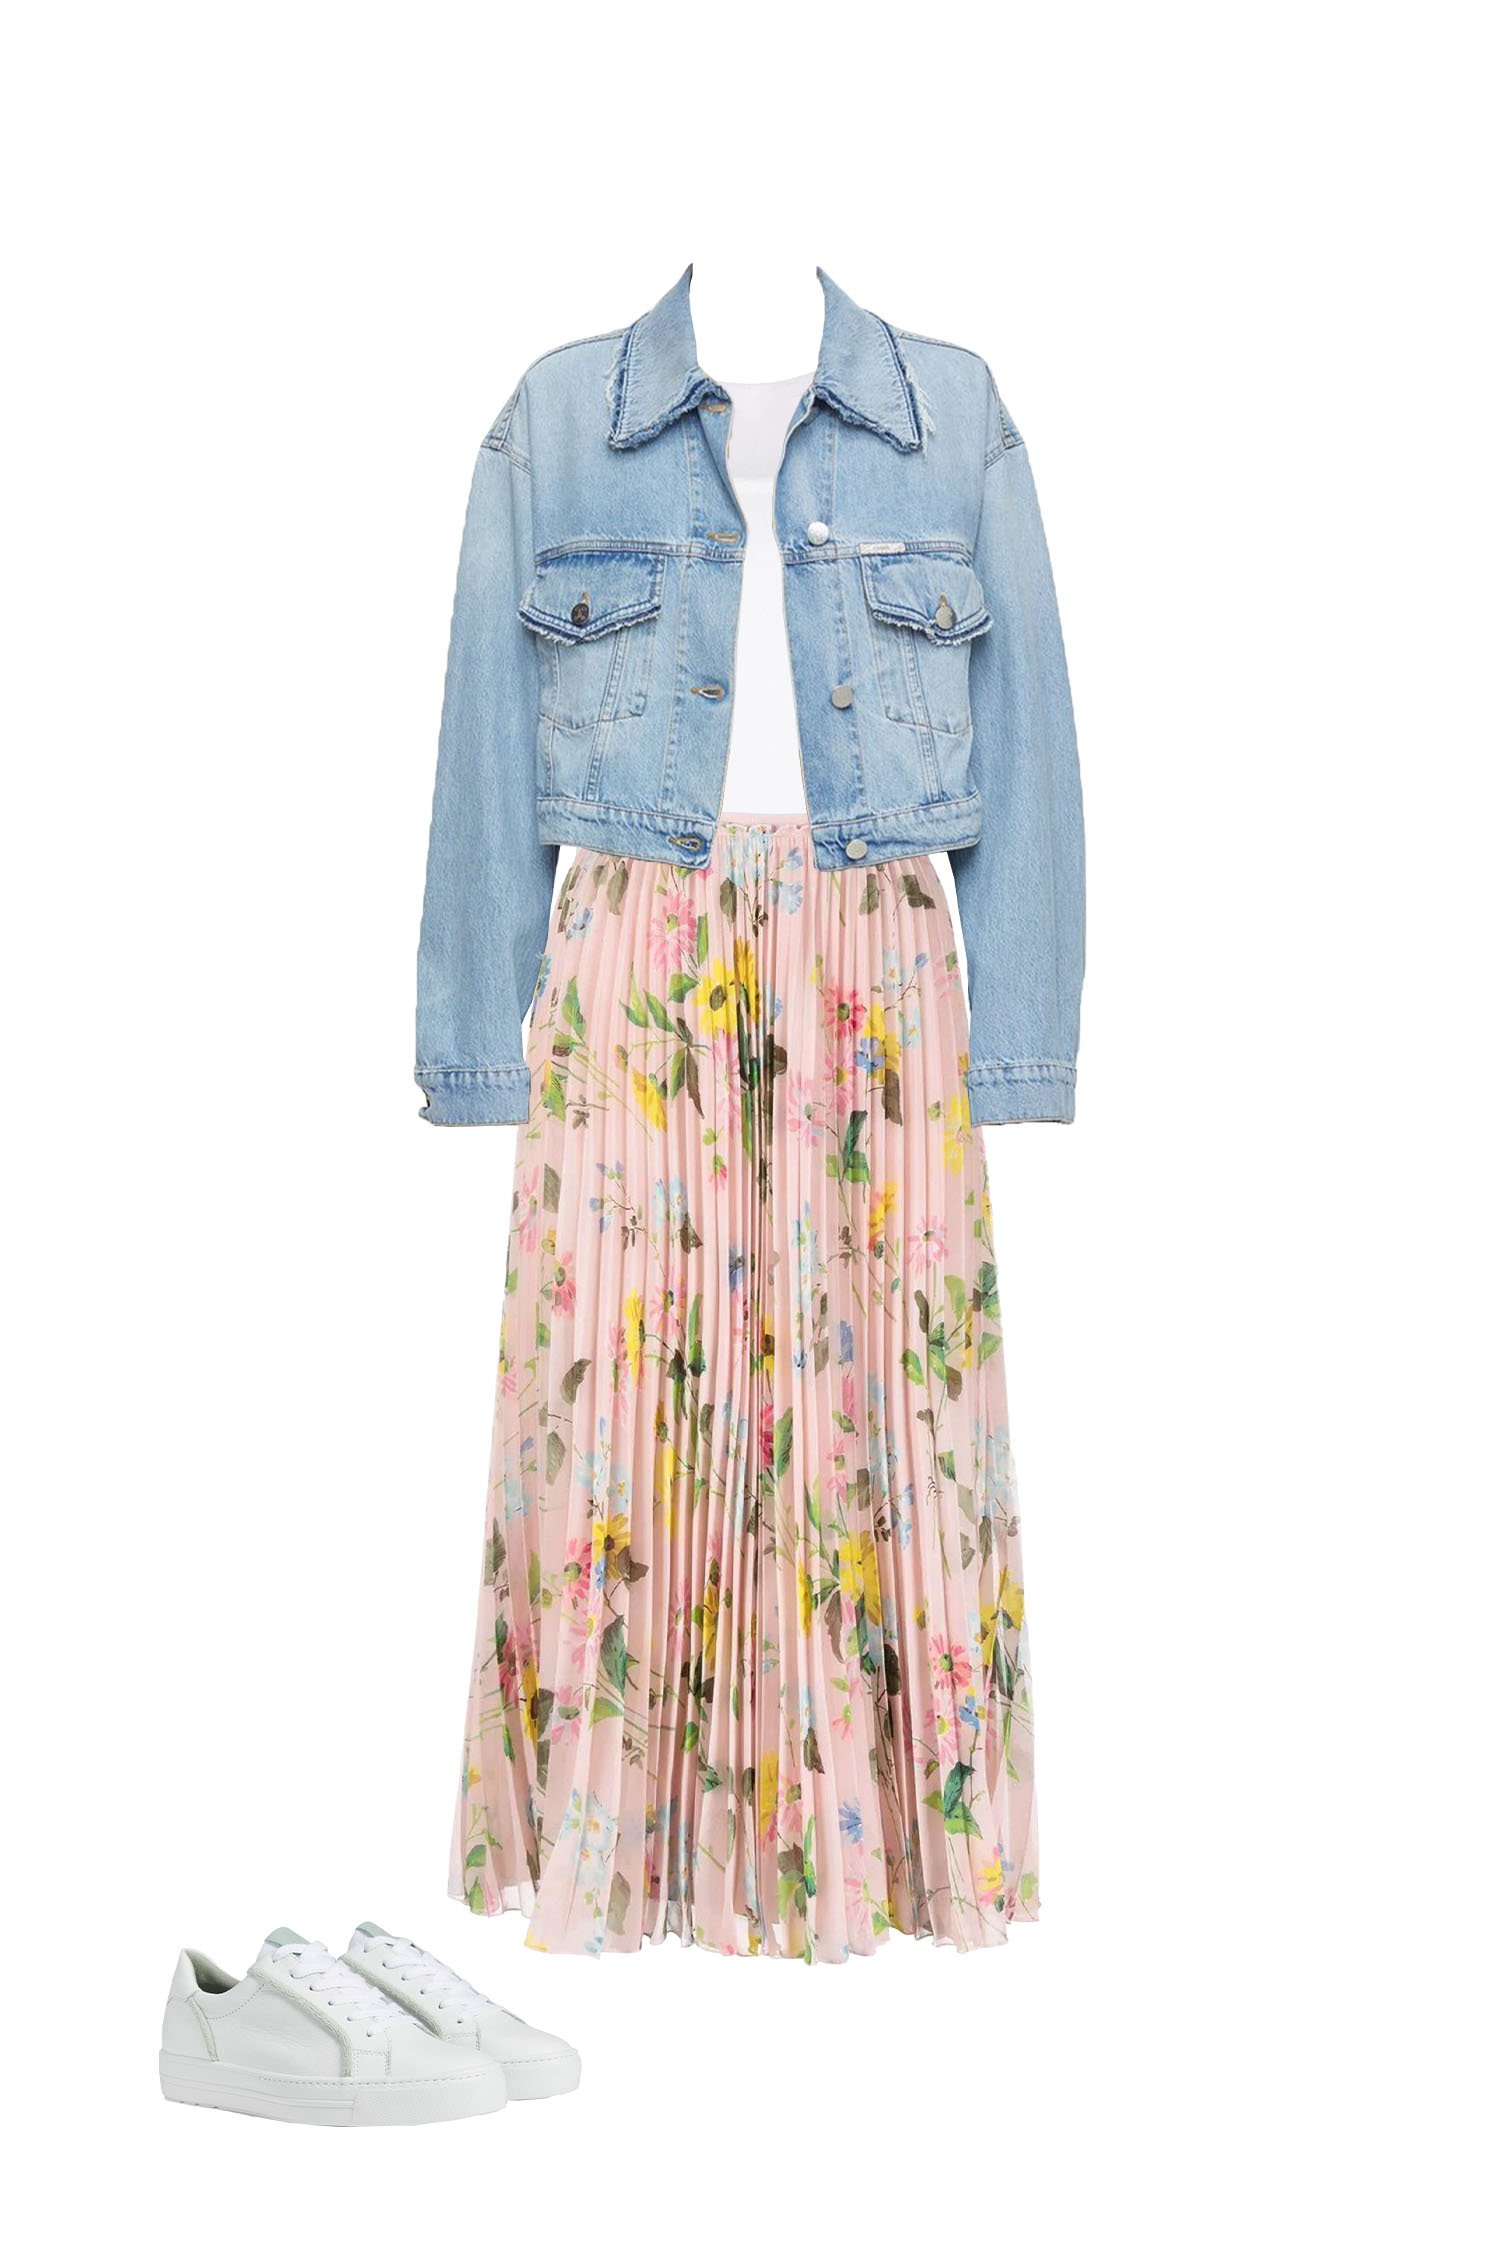 Pink Floral Pleated Skirt with White Tank Top and Light Blue Denim Jacket Outfit